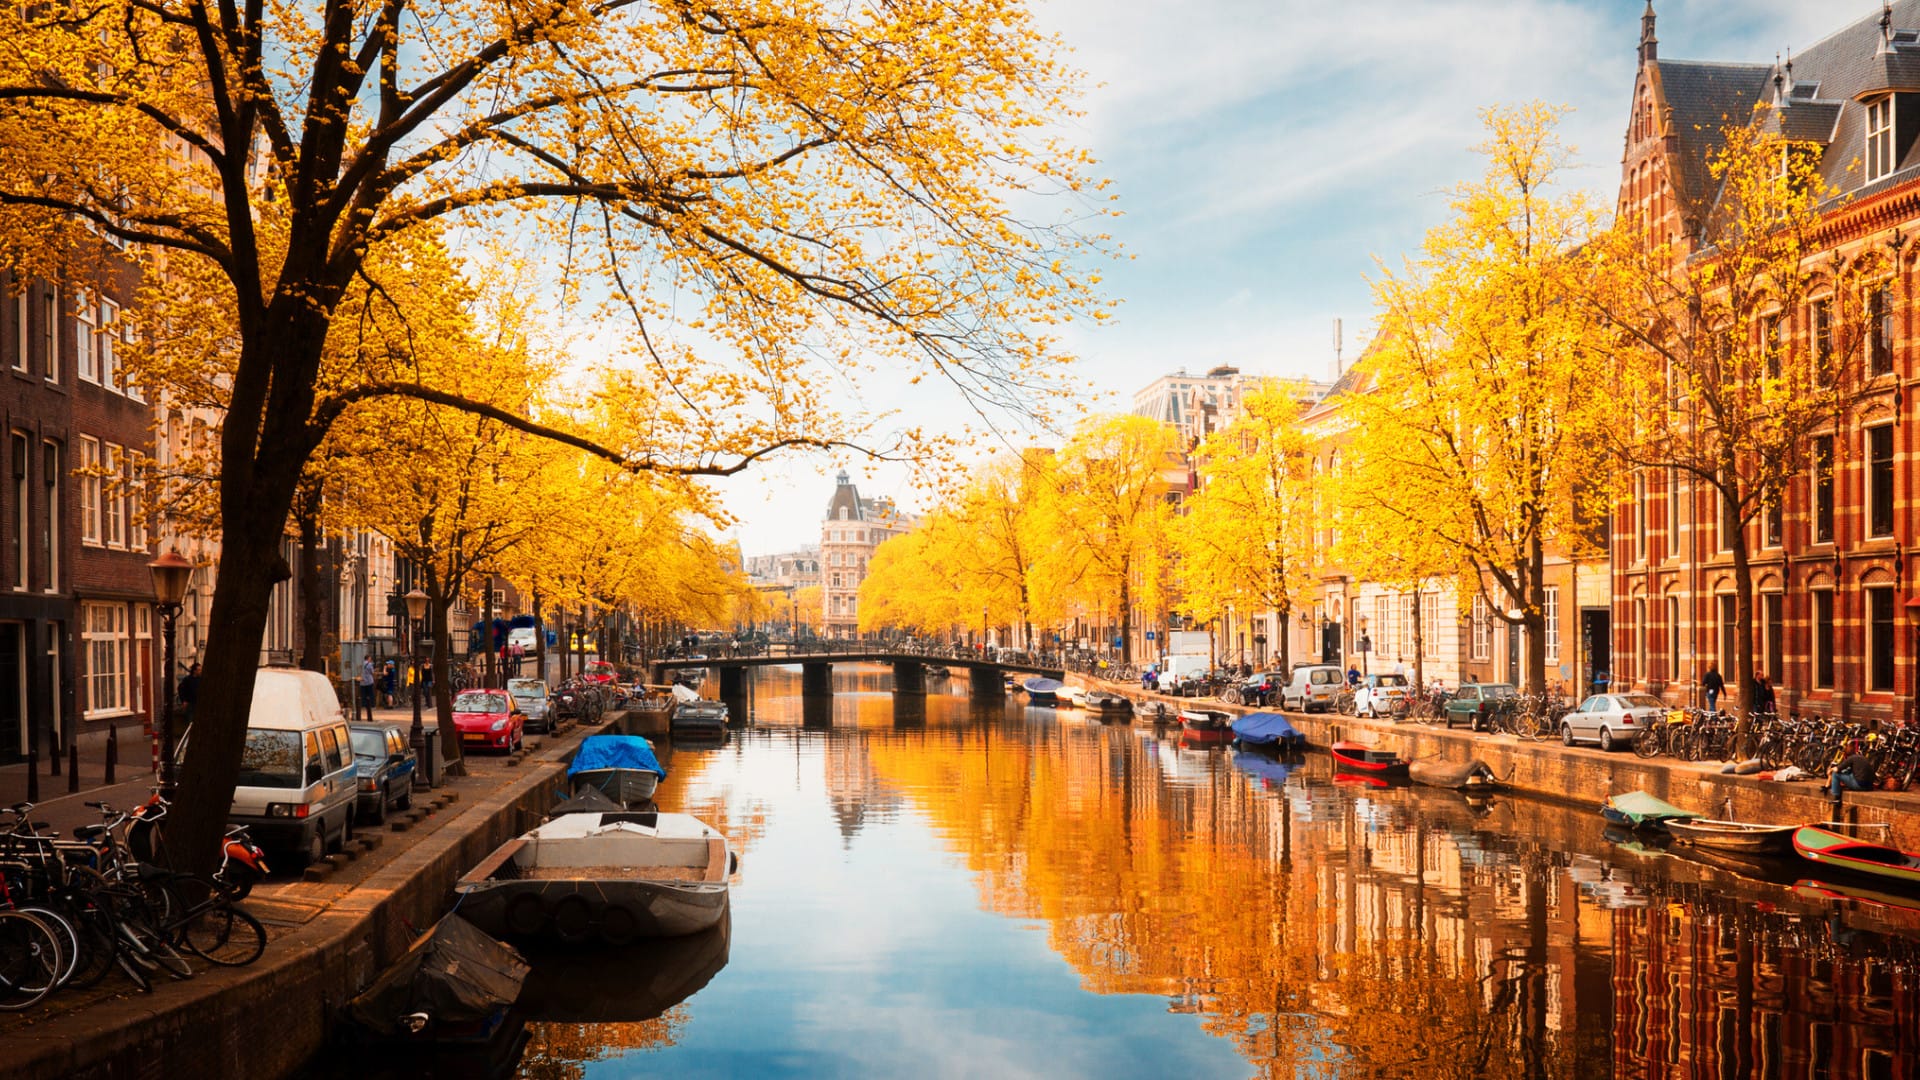 Image of yellow trees in Europe